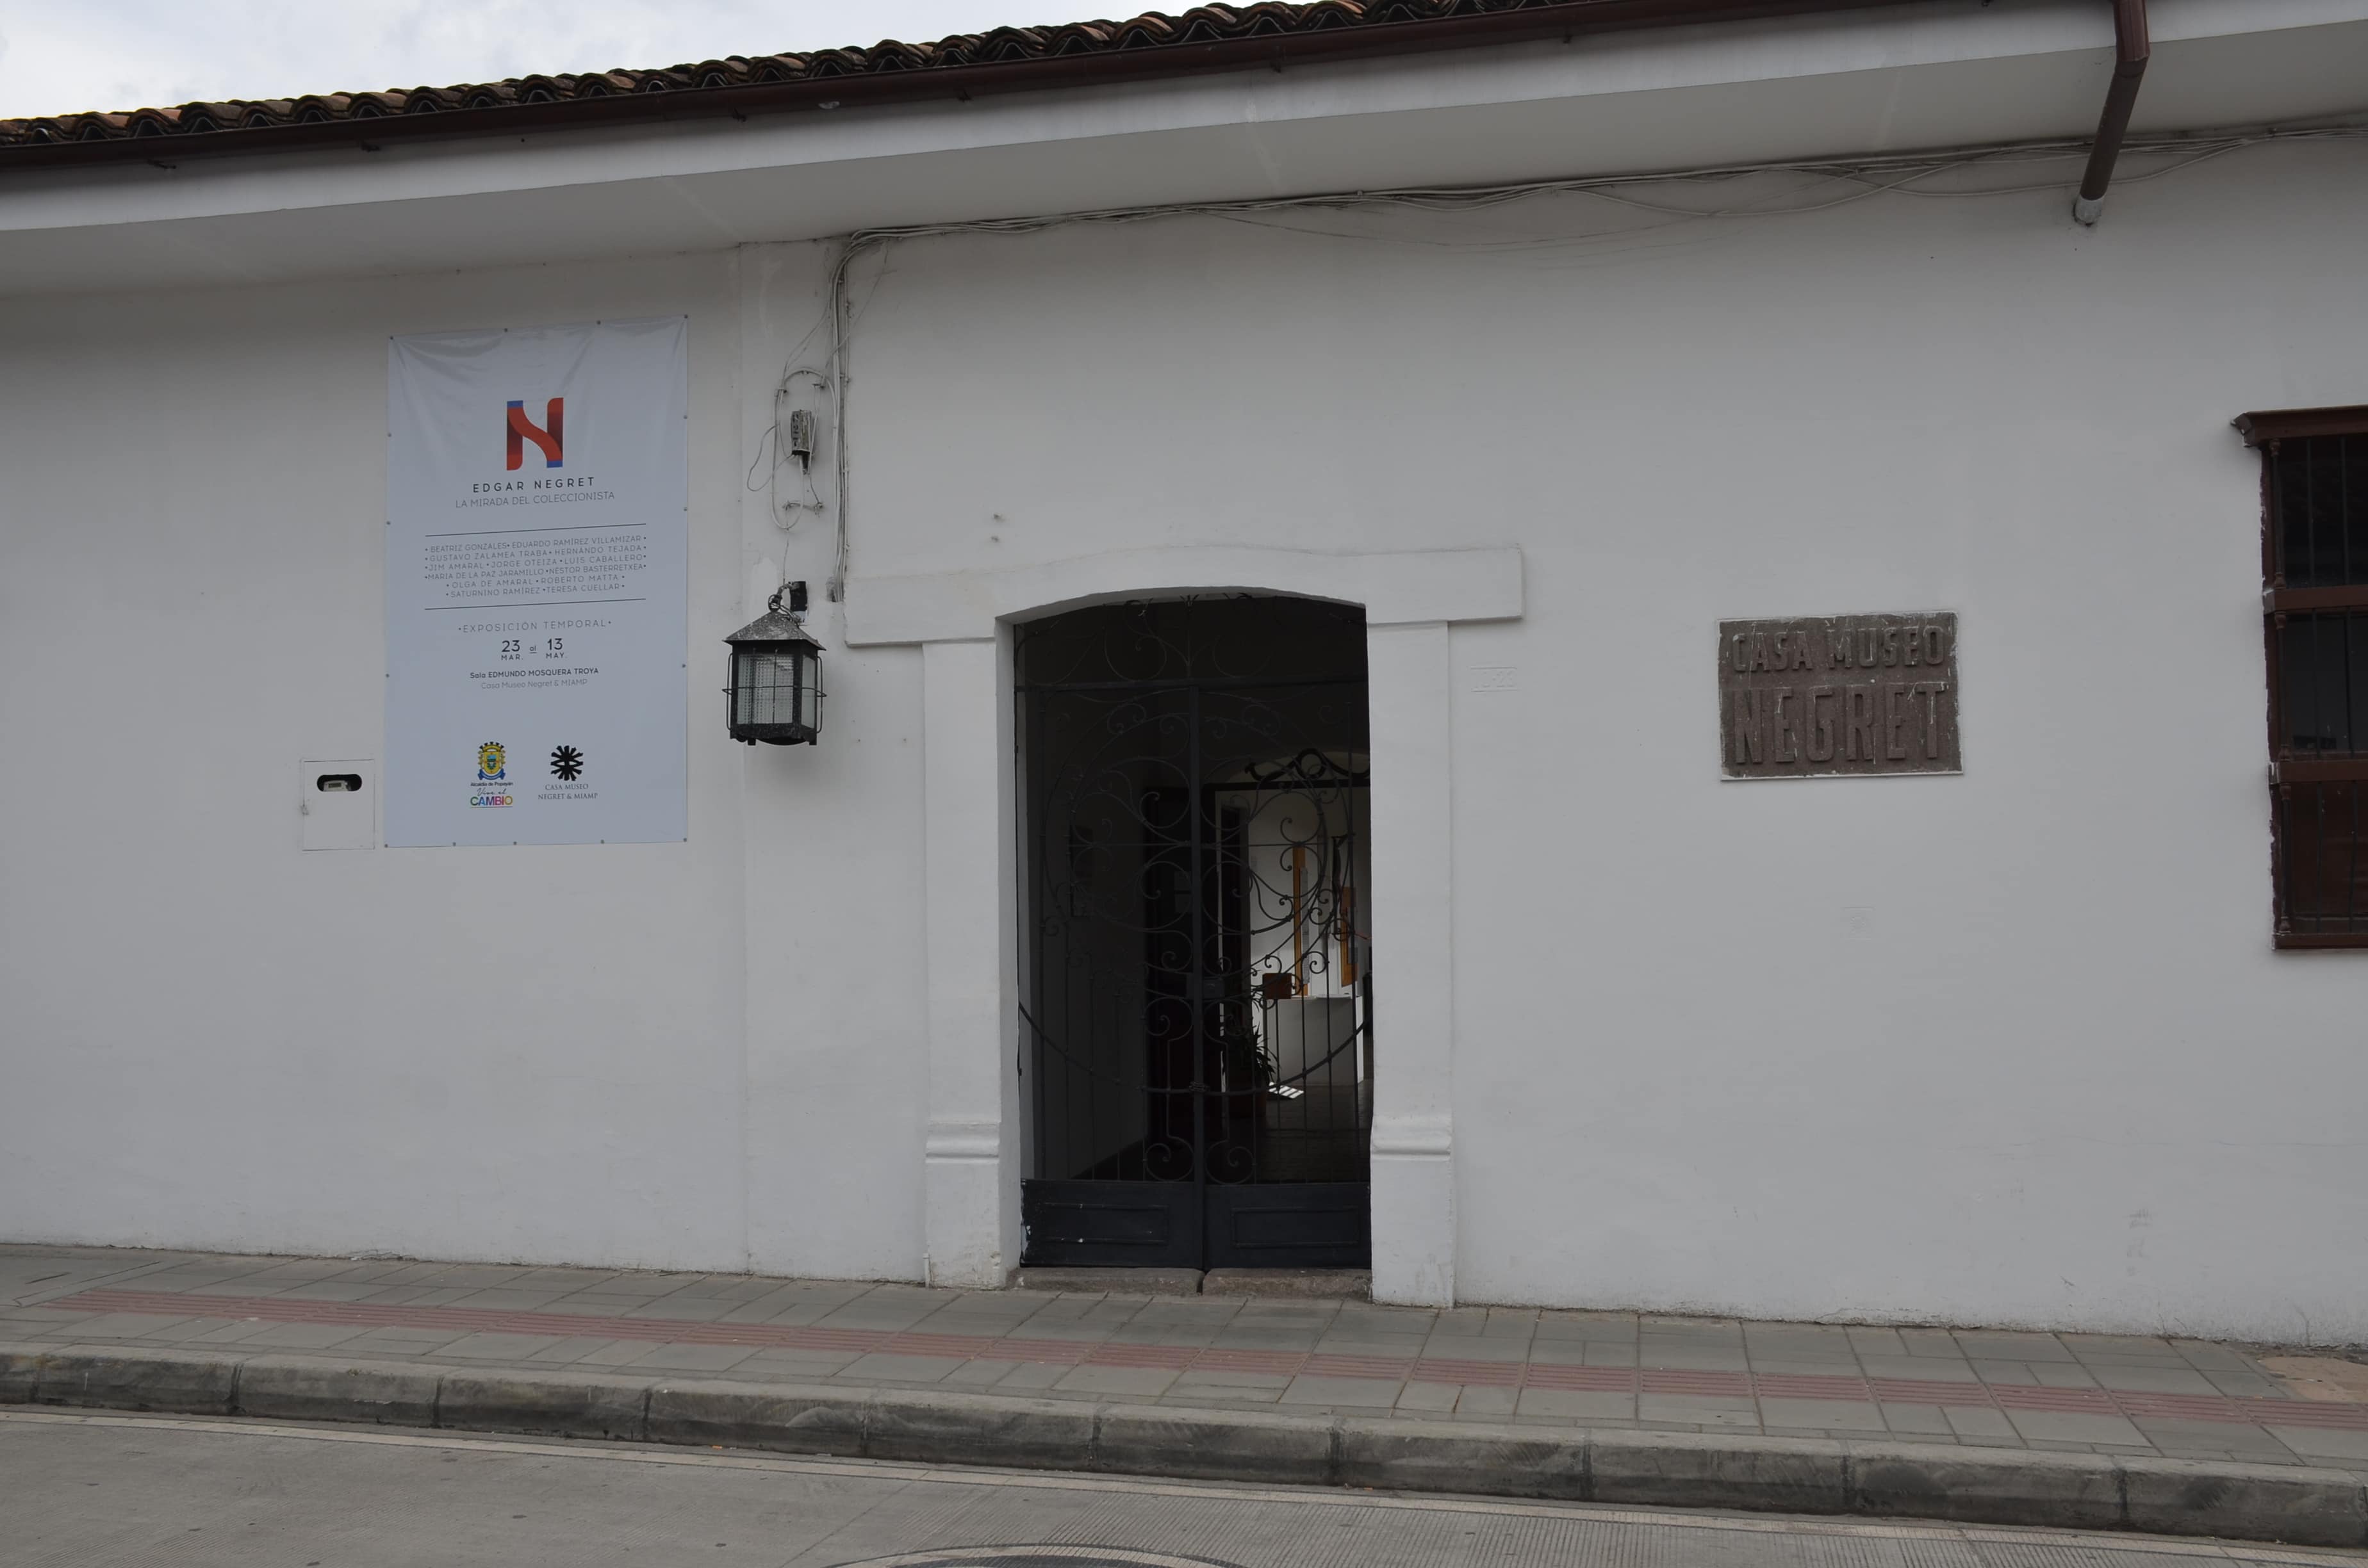 Negret House Museum in Popayán, Cauca, Colombia